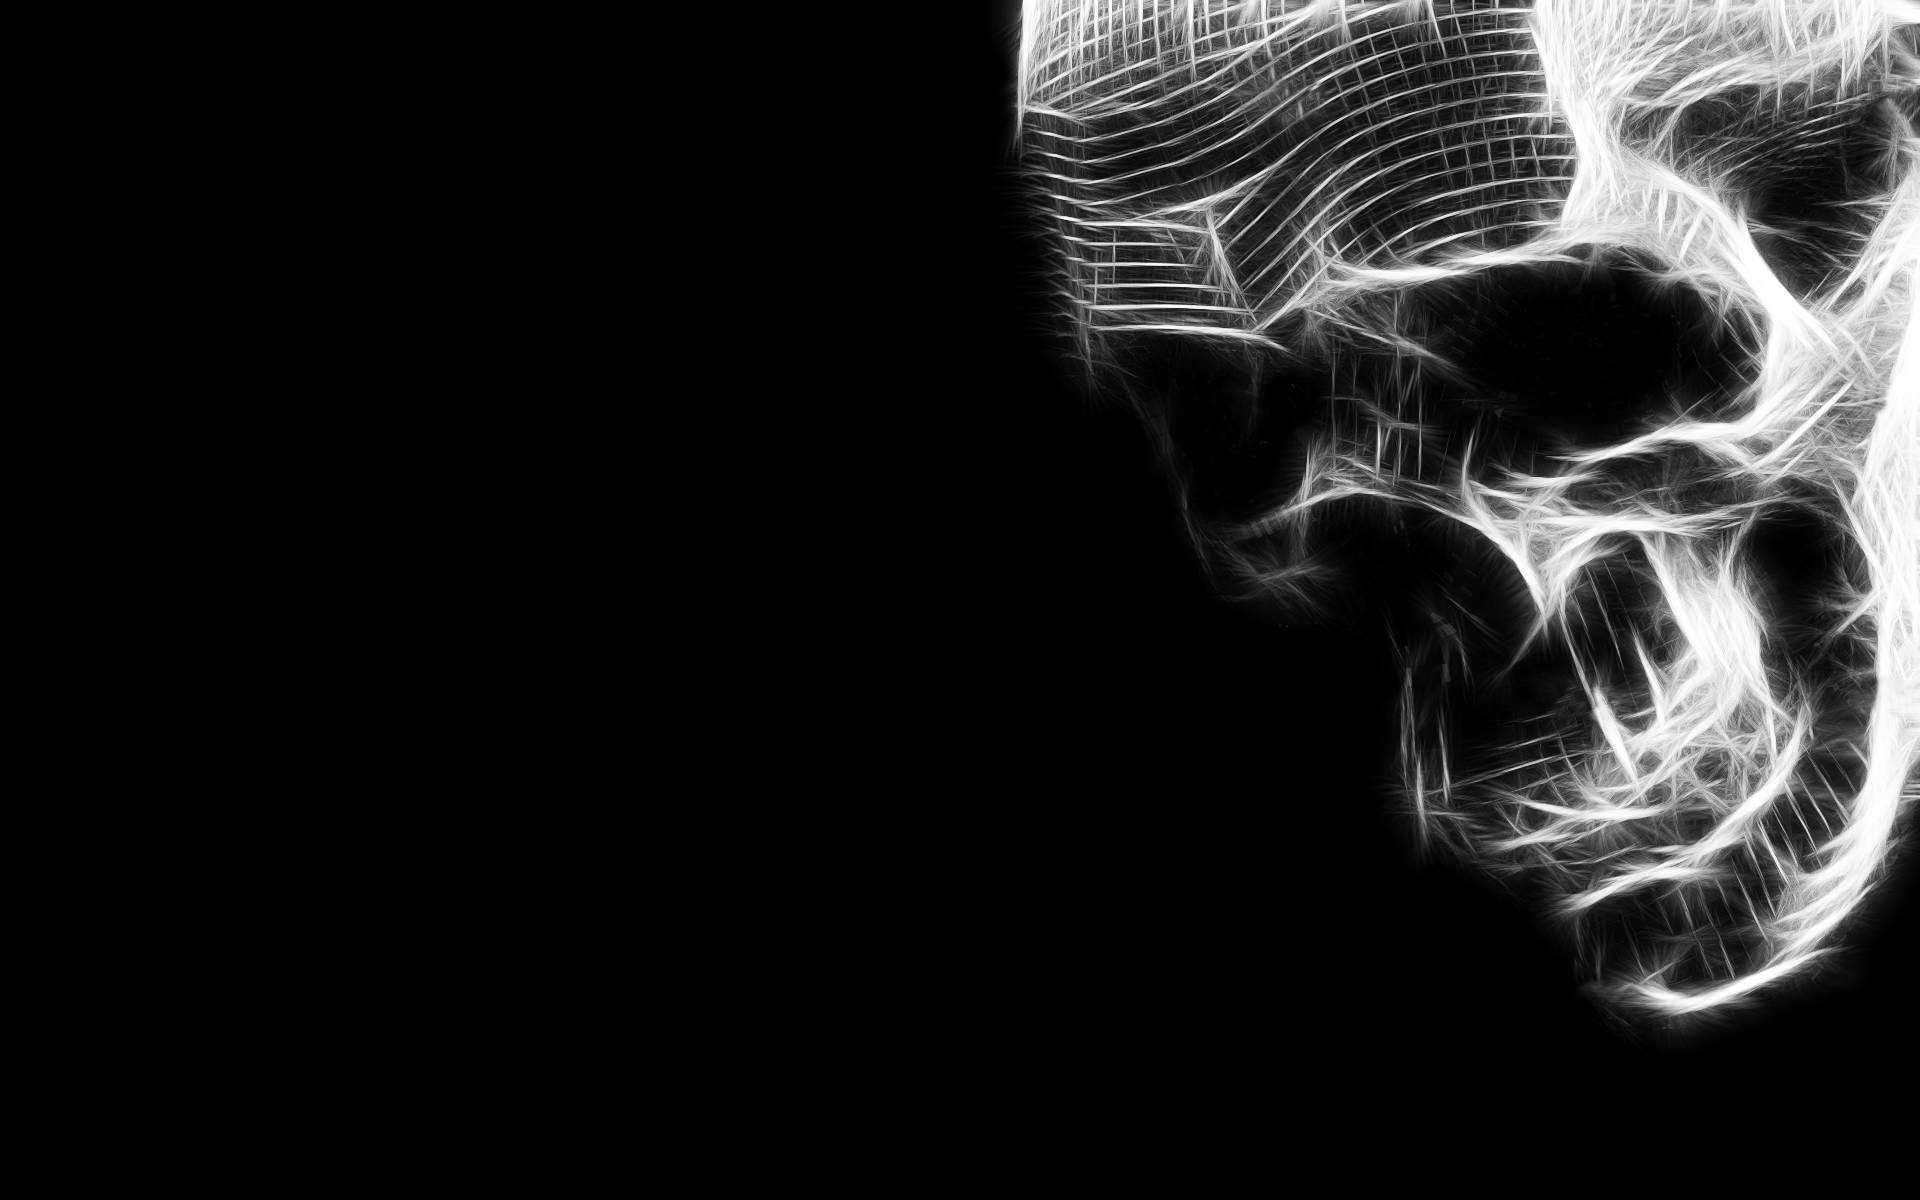 1920x1200 cool black background designs. cool skull wallpapers hd cwh background  photos high resolution 19201200 wallpaper